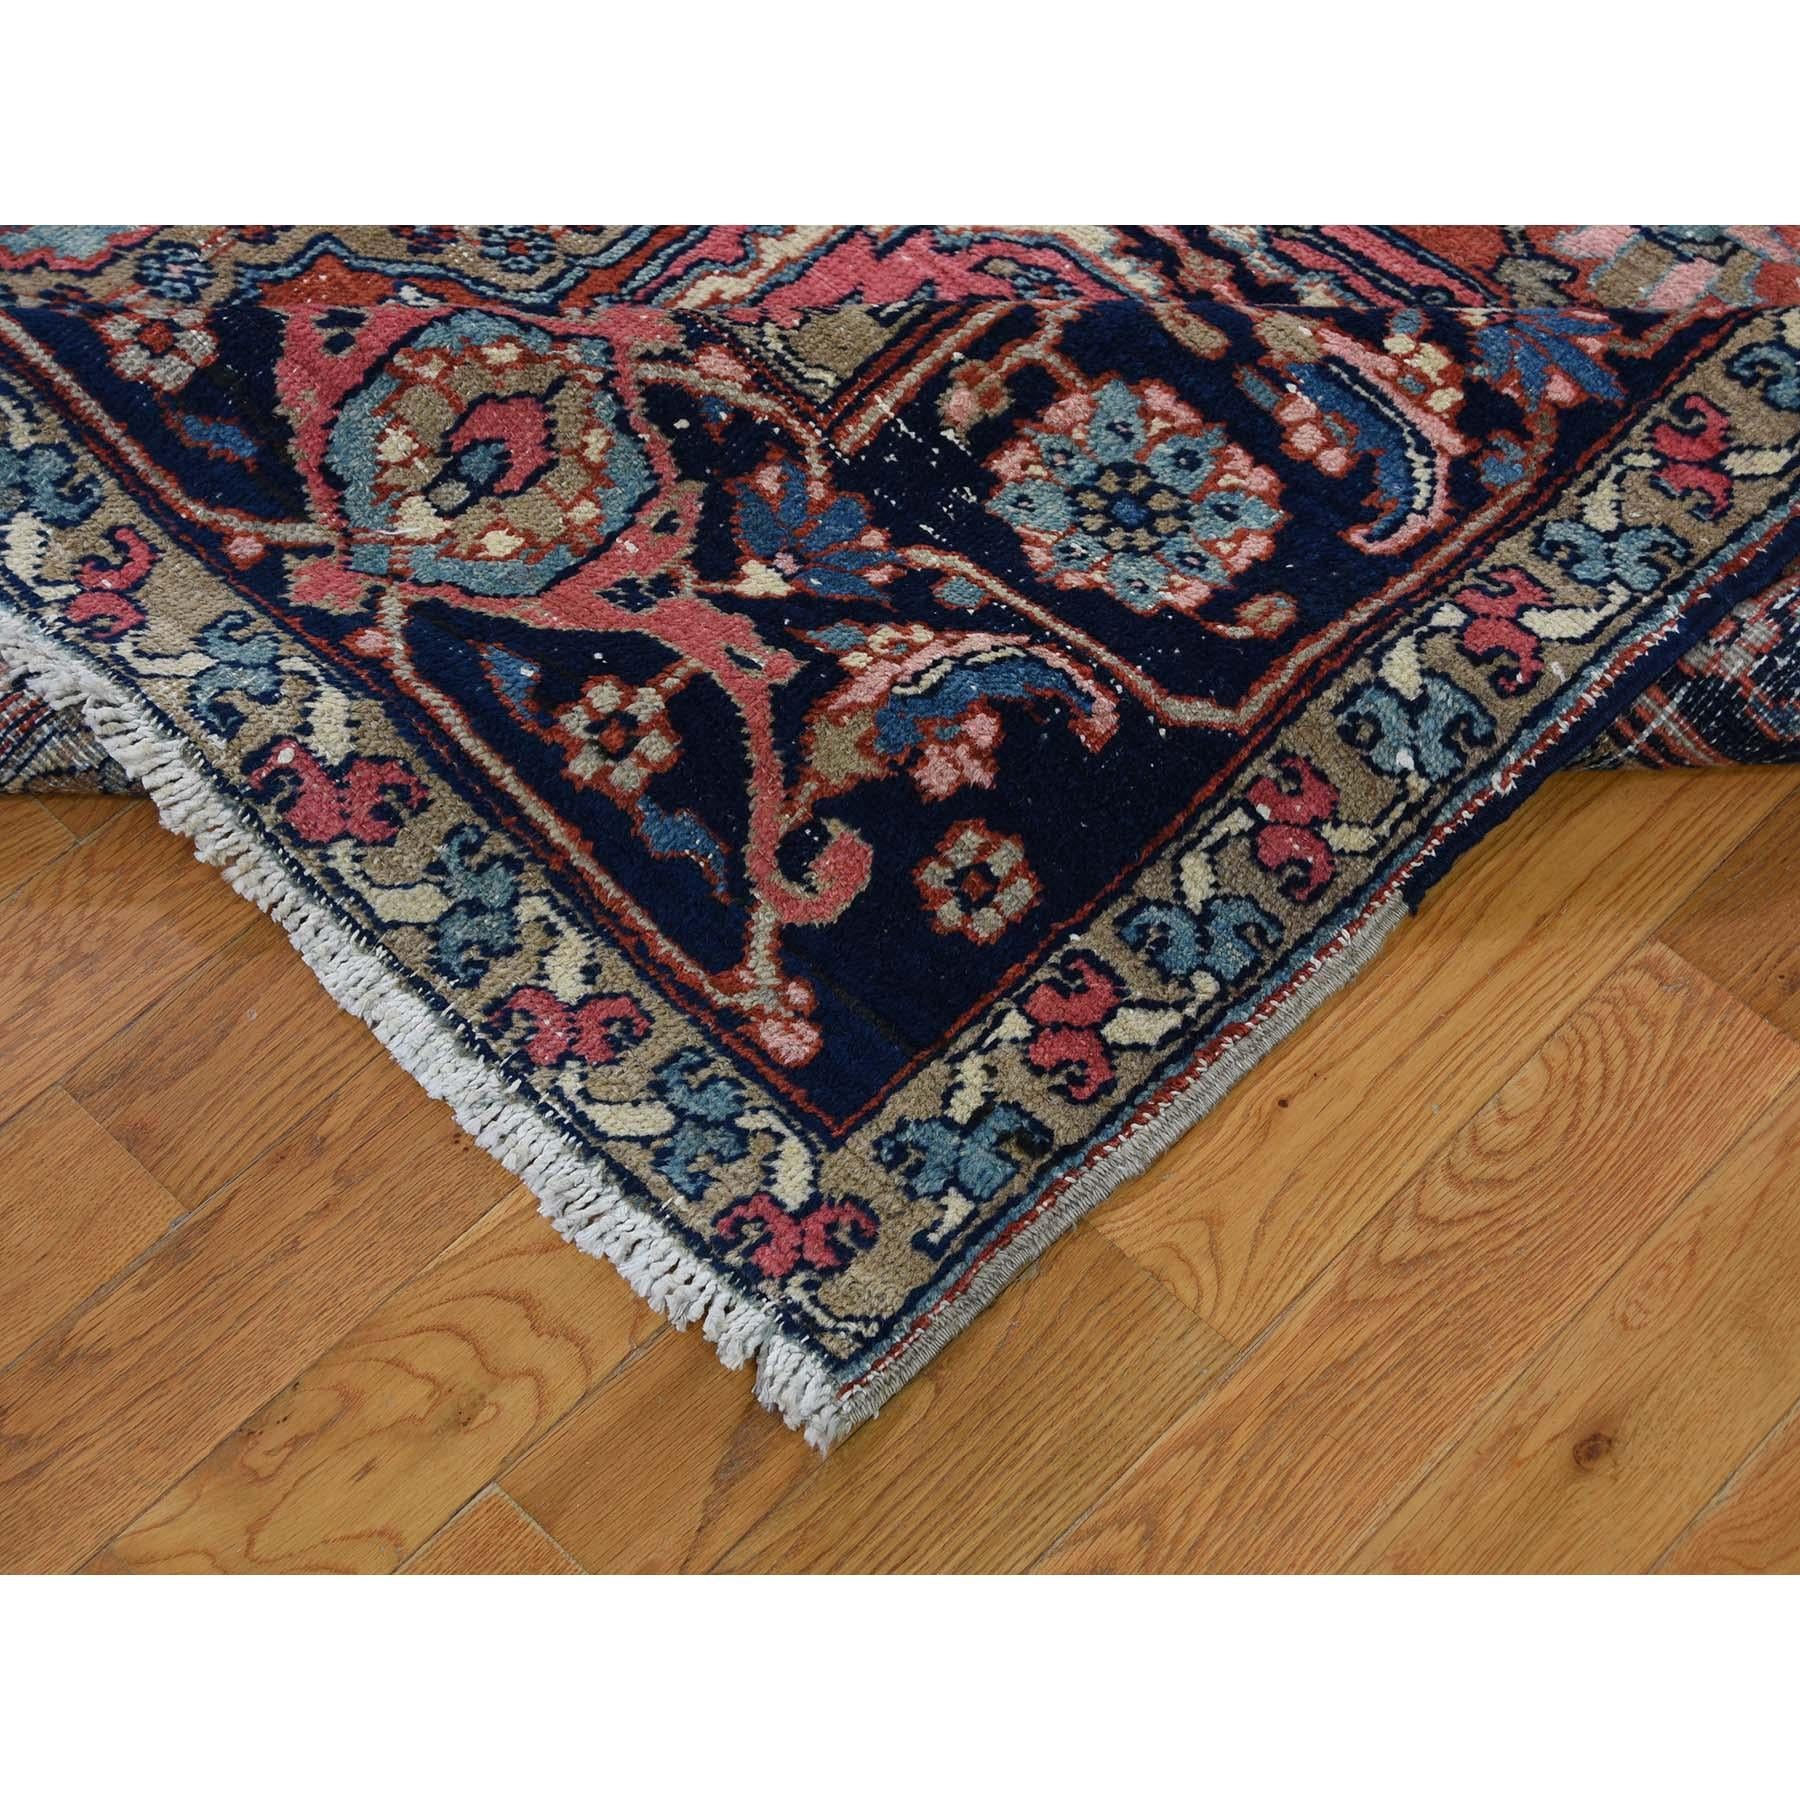 Antique Persian Heriz Good Condition Flower Design Hand-Knotted Oriental Rug 1